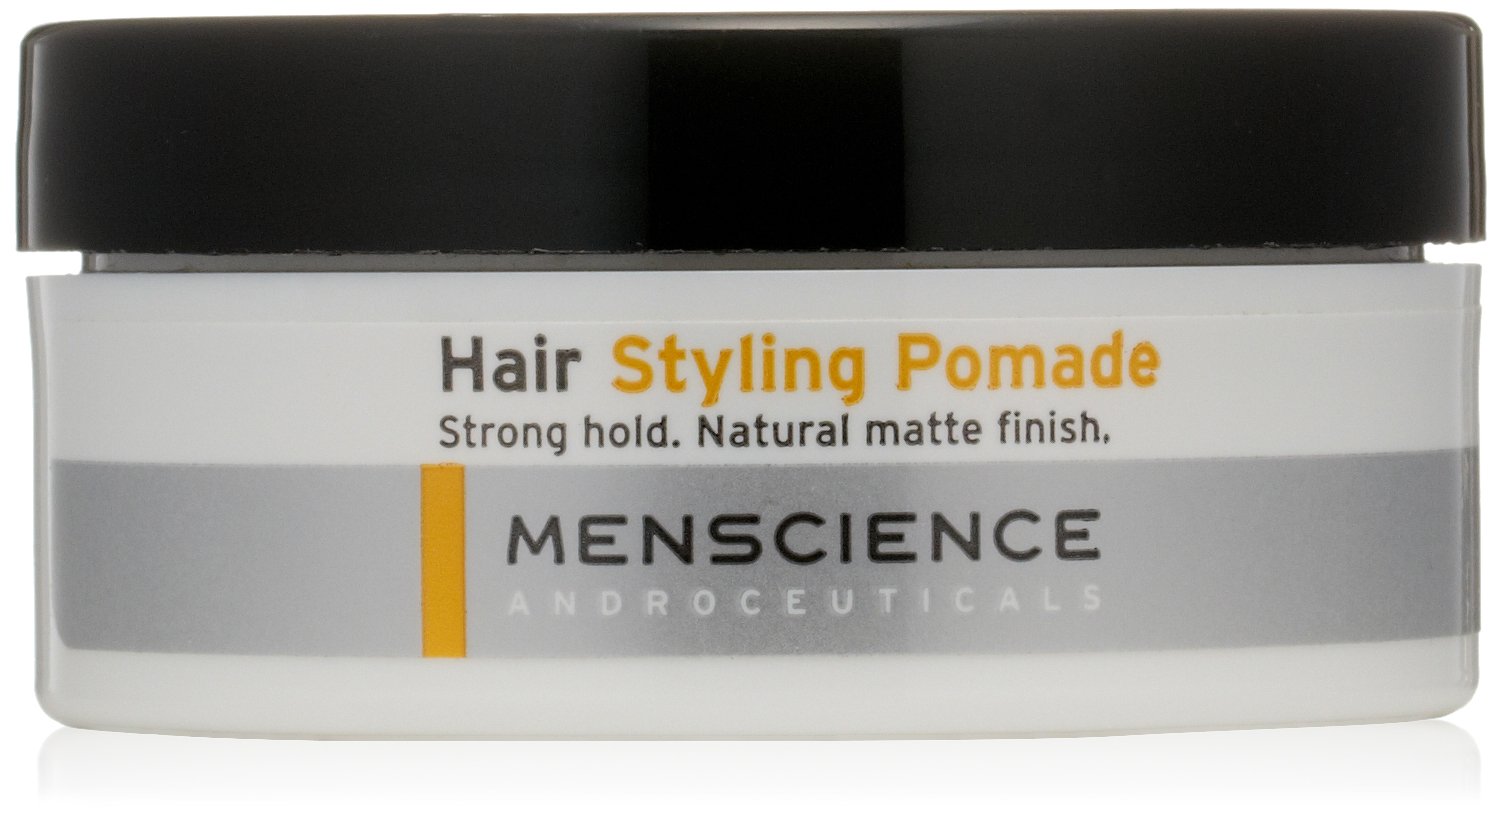 MenScience Androceuticals Hair Styling Pomade, 2 oz